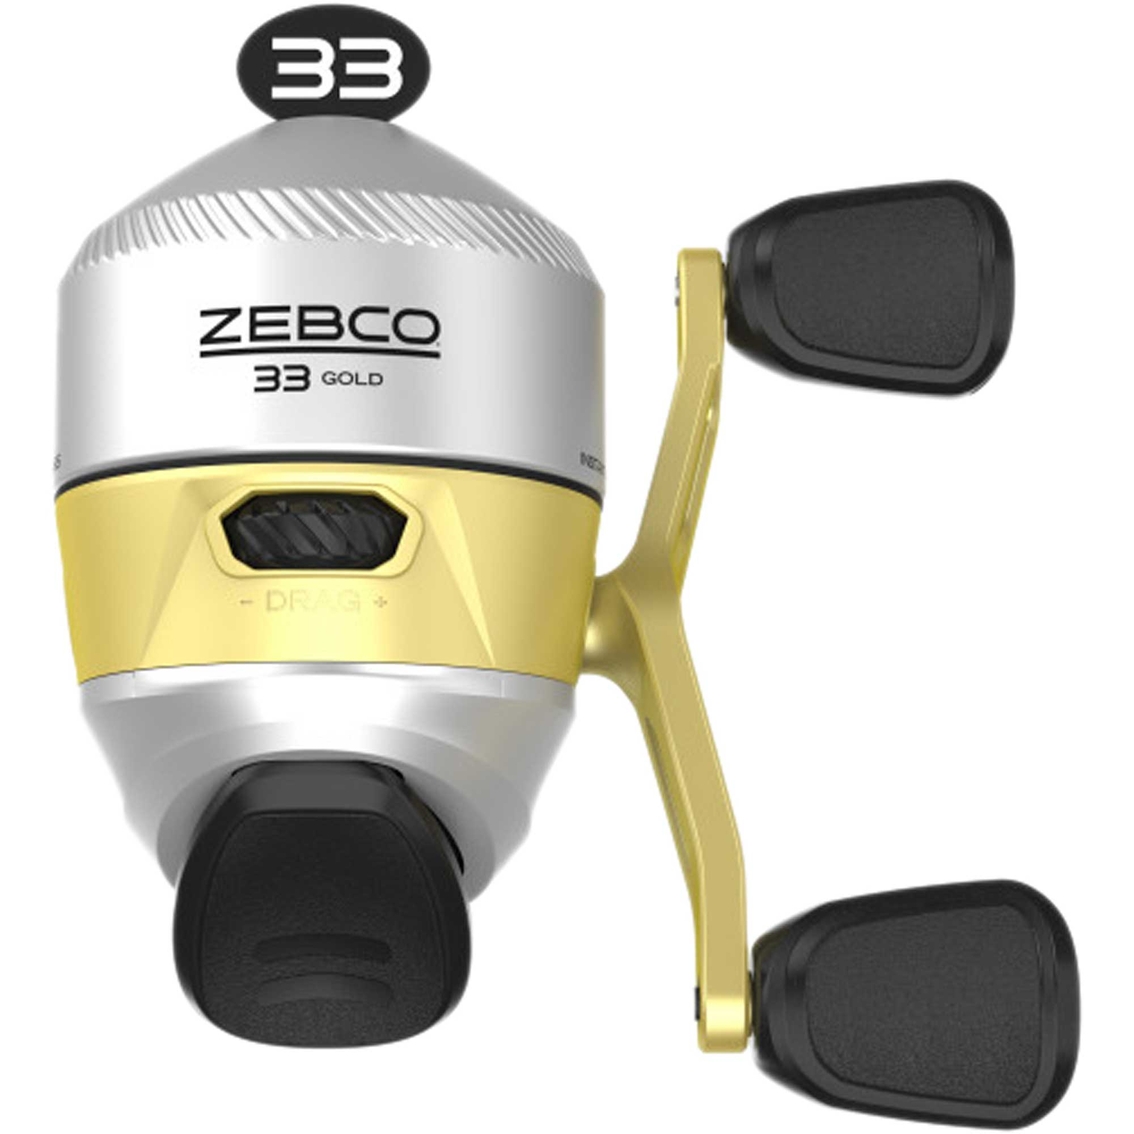 Zebco 33 Gold Spincast Reel 10#c, Freshwater Rods & Reels, Sports &  Outdoors